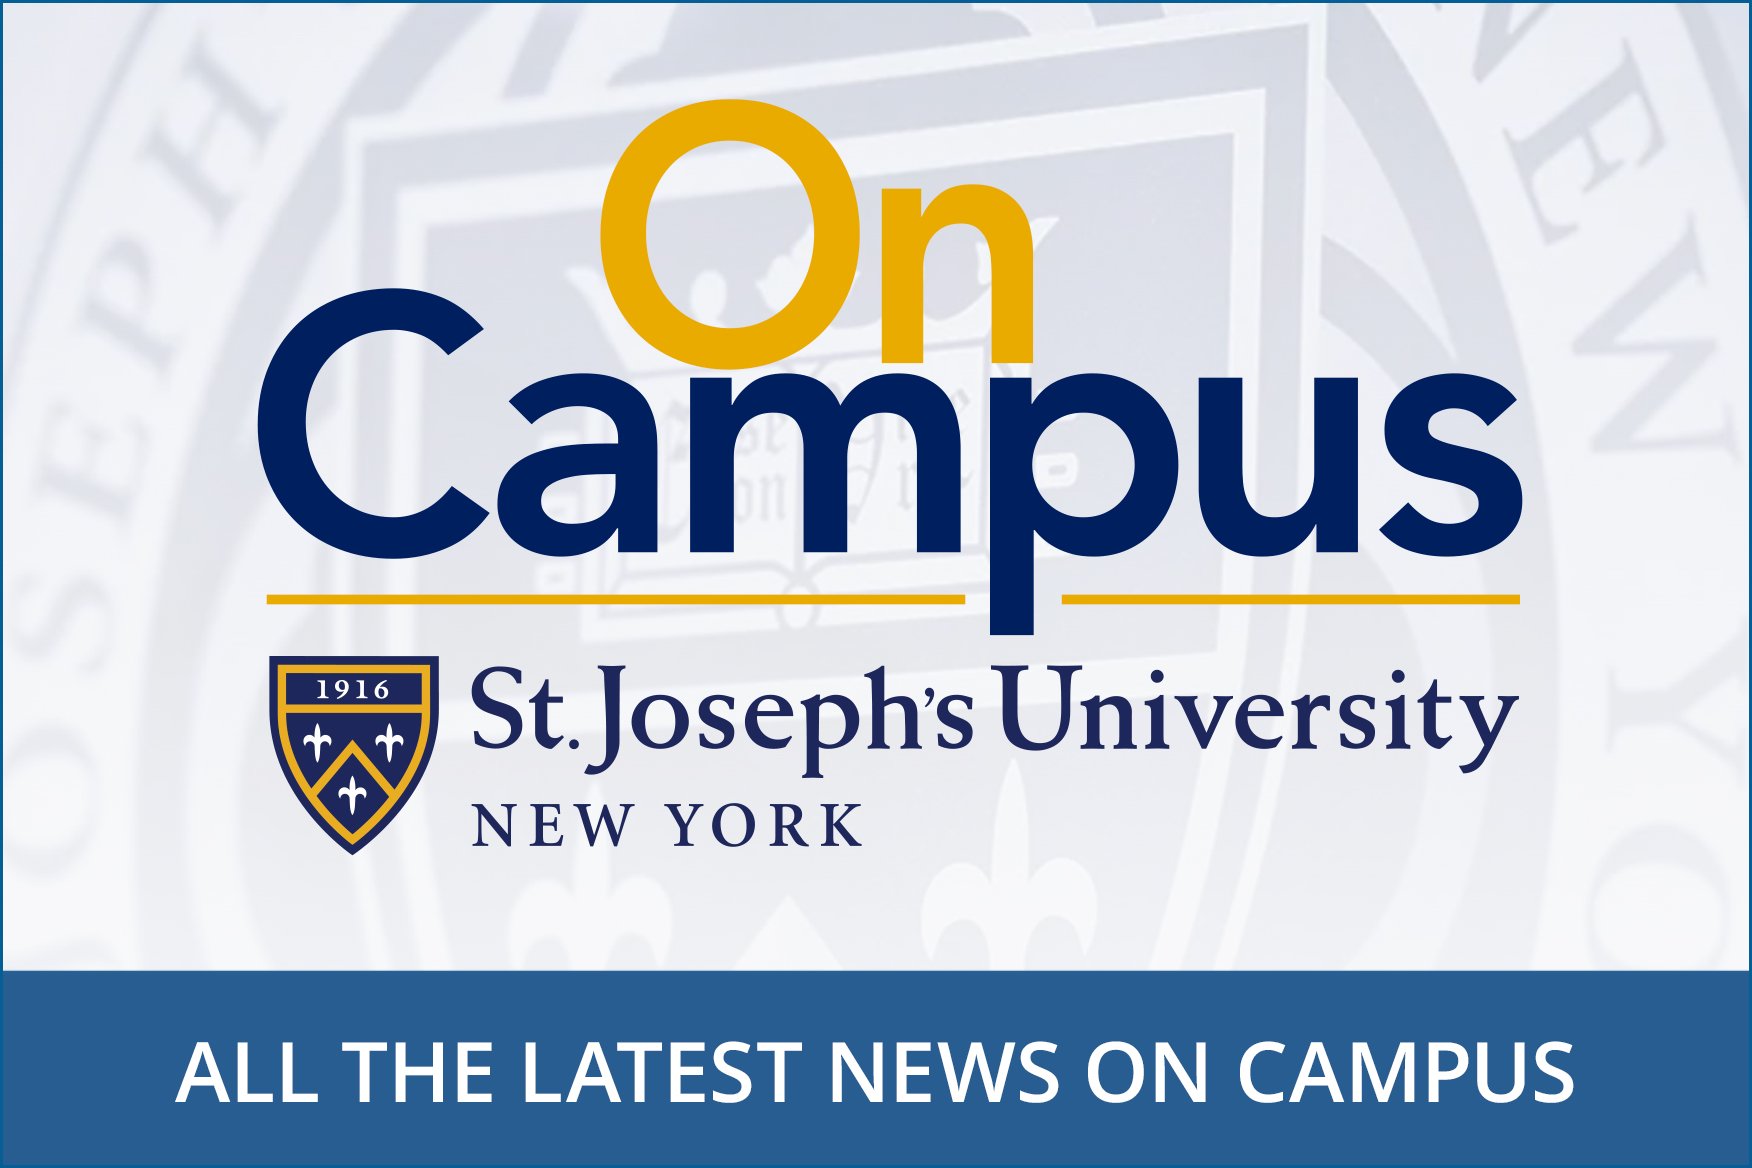 OnCampus St. Joseph's University, New York. All the latest news on campus